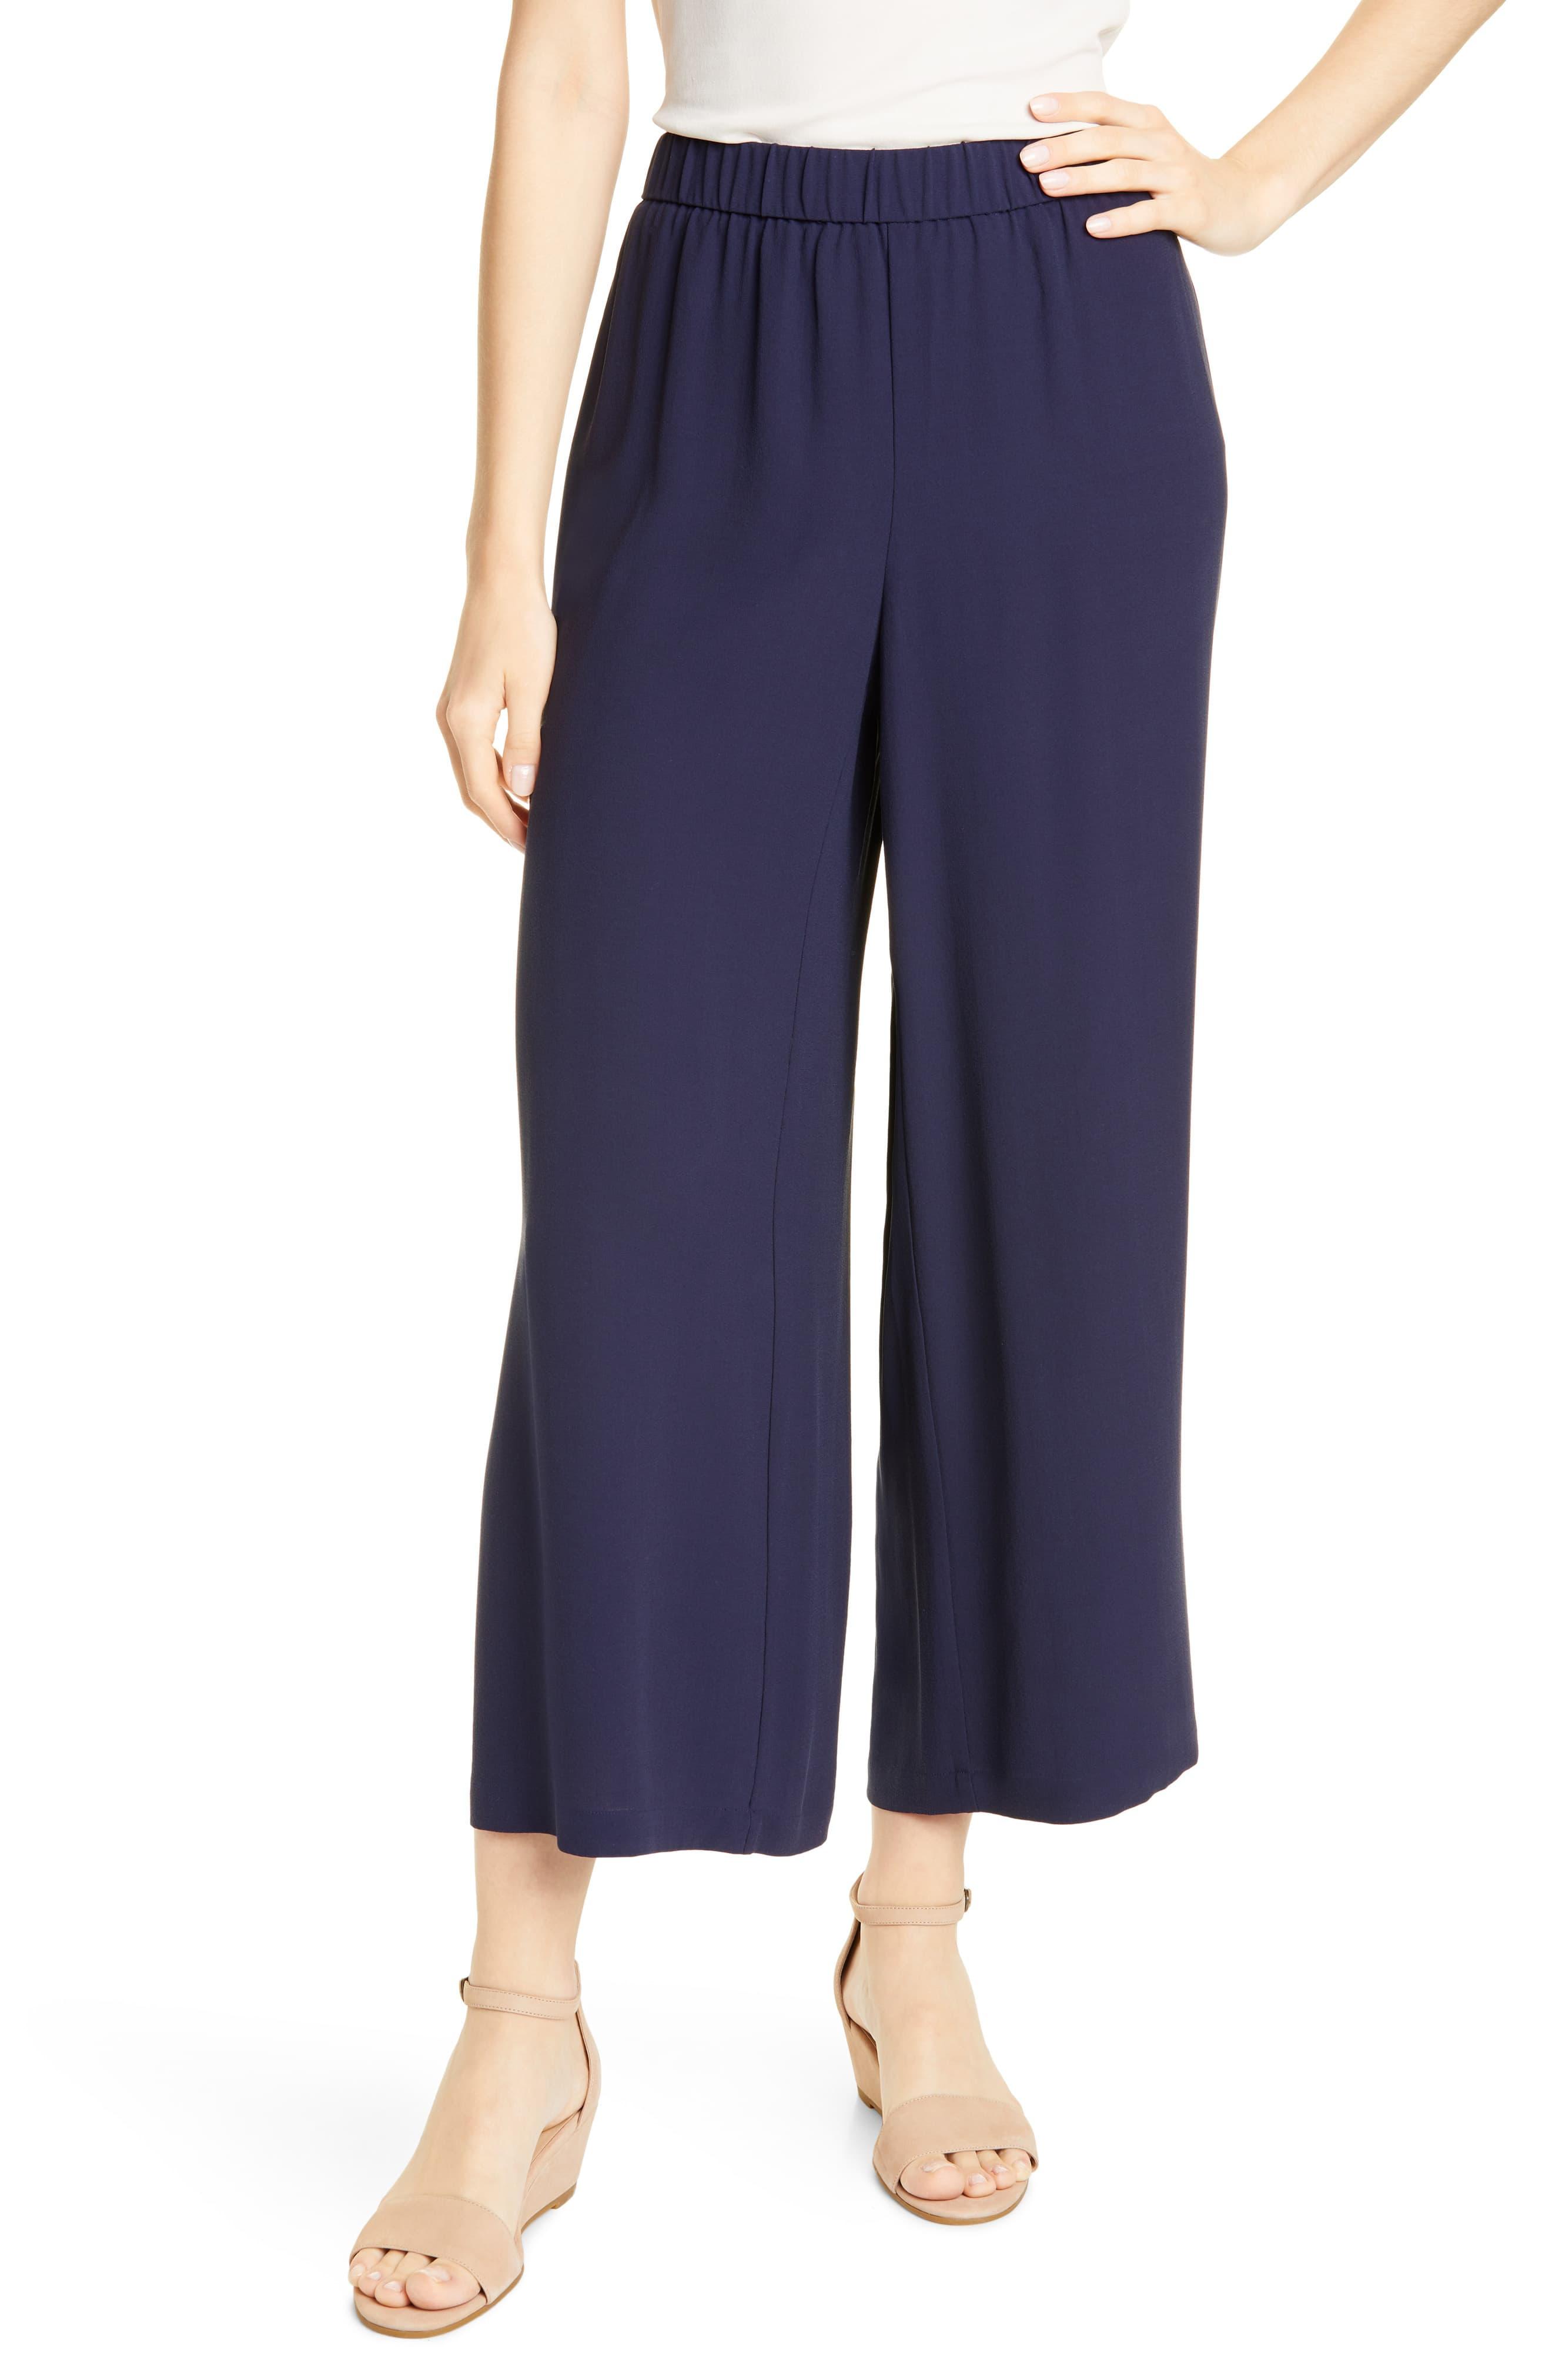 Eileen Fisher Silk Crepe Ankle Pants in Blue - Lyst